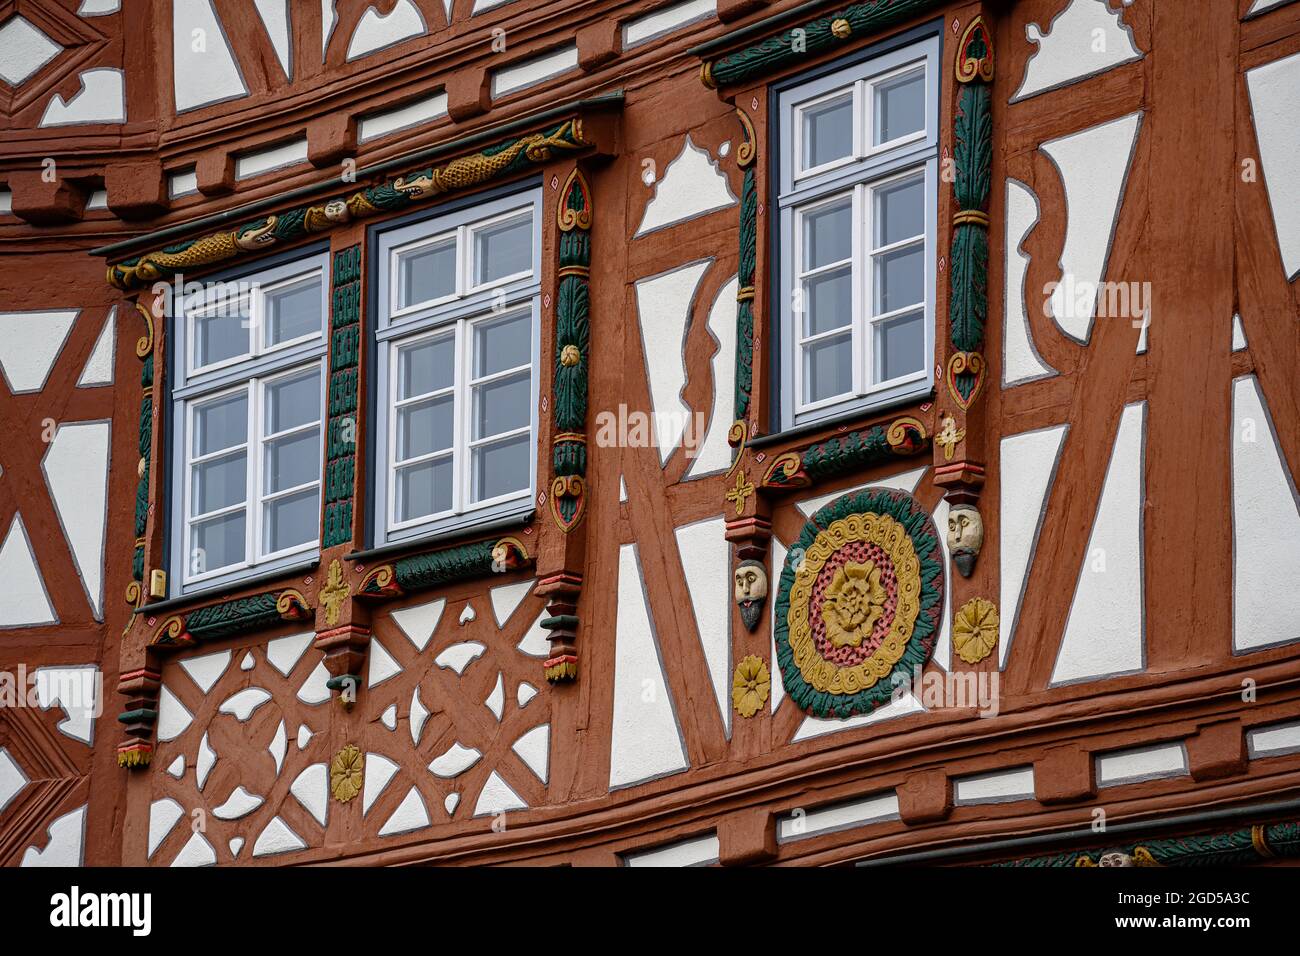 geography / travel, Germany, Baden-Wuerttemberg, Mosbach, FOR GREETING/POSTCARD-USE IN GERM.SPEAK.C CERTAIN RESTRICTIONS MAY APPLY Stock Photo